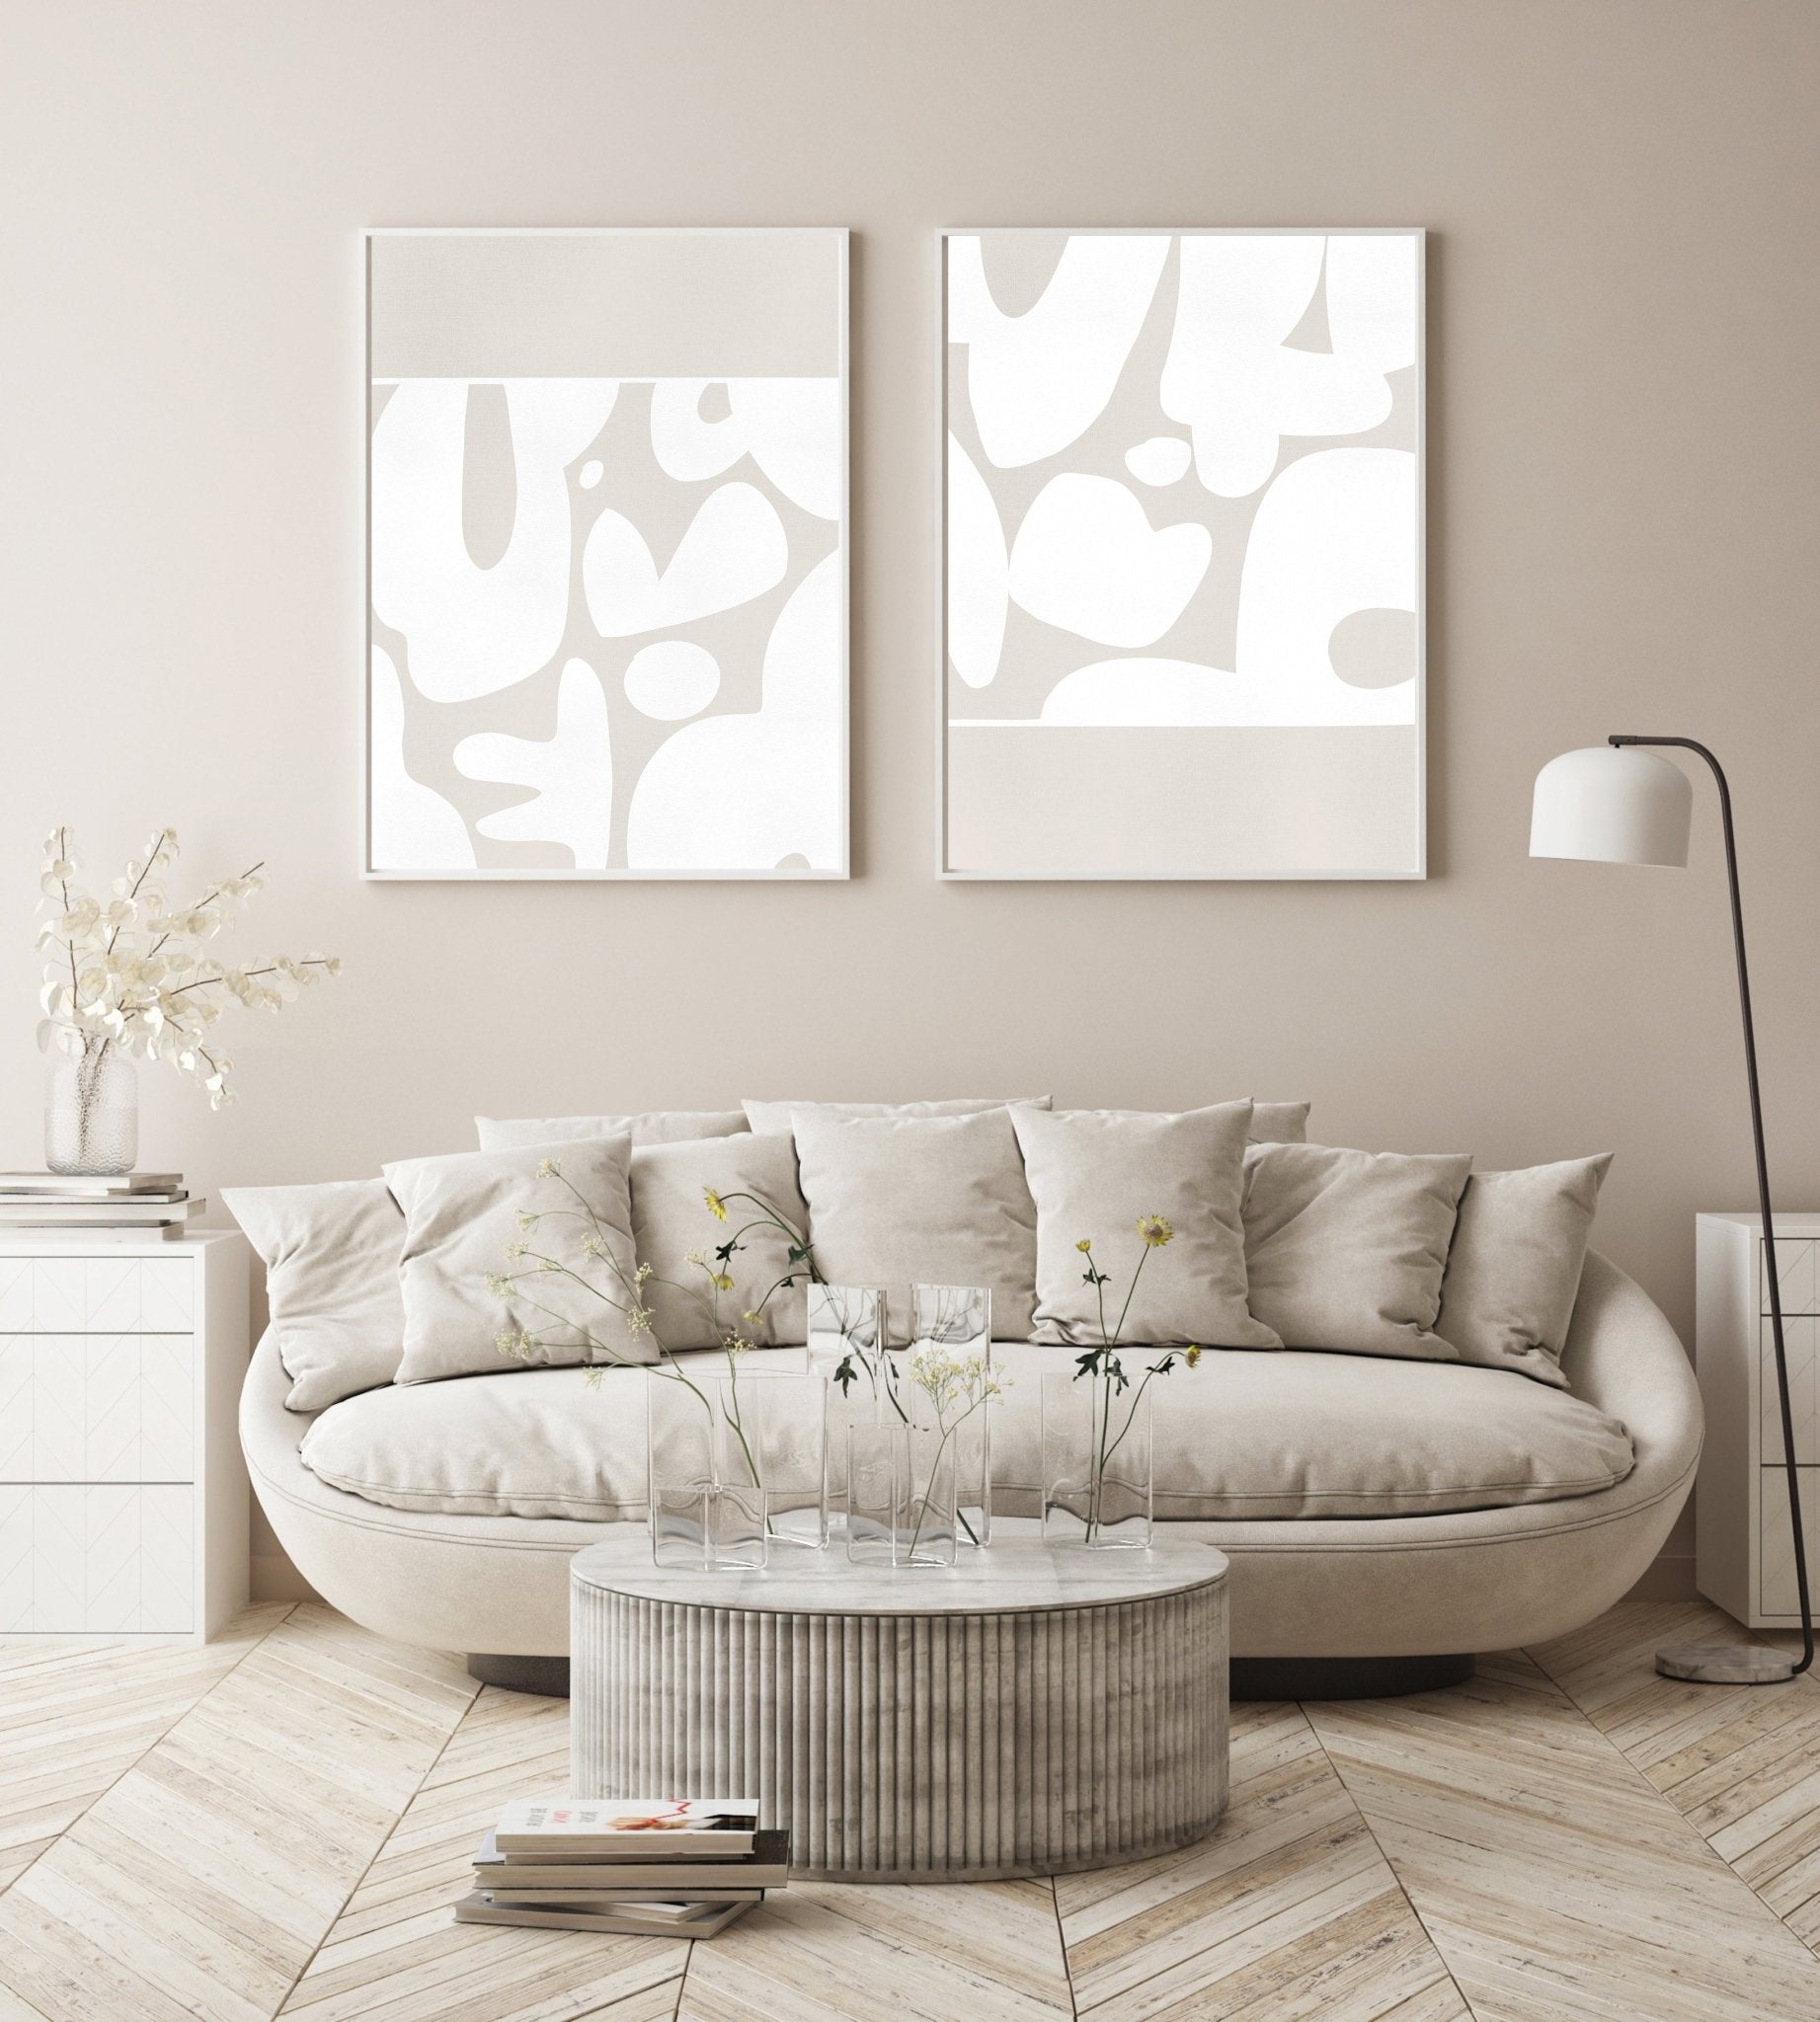 Sofia Abstract Poster Set - D'Luxe Prints